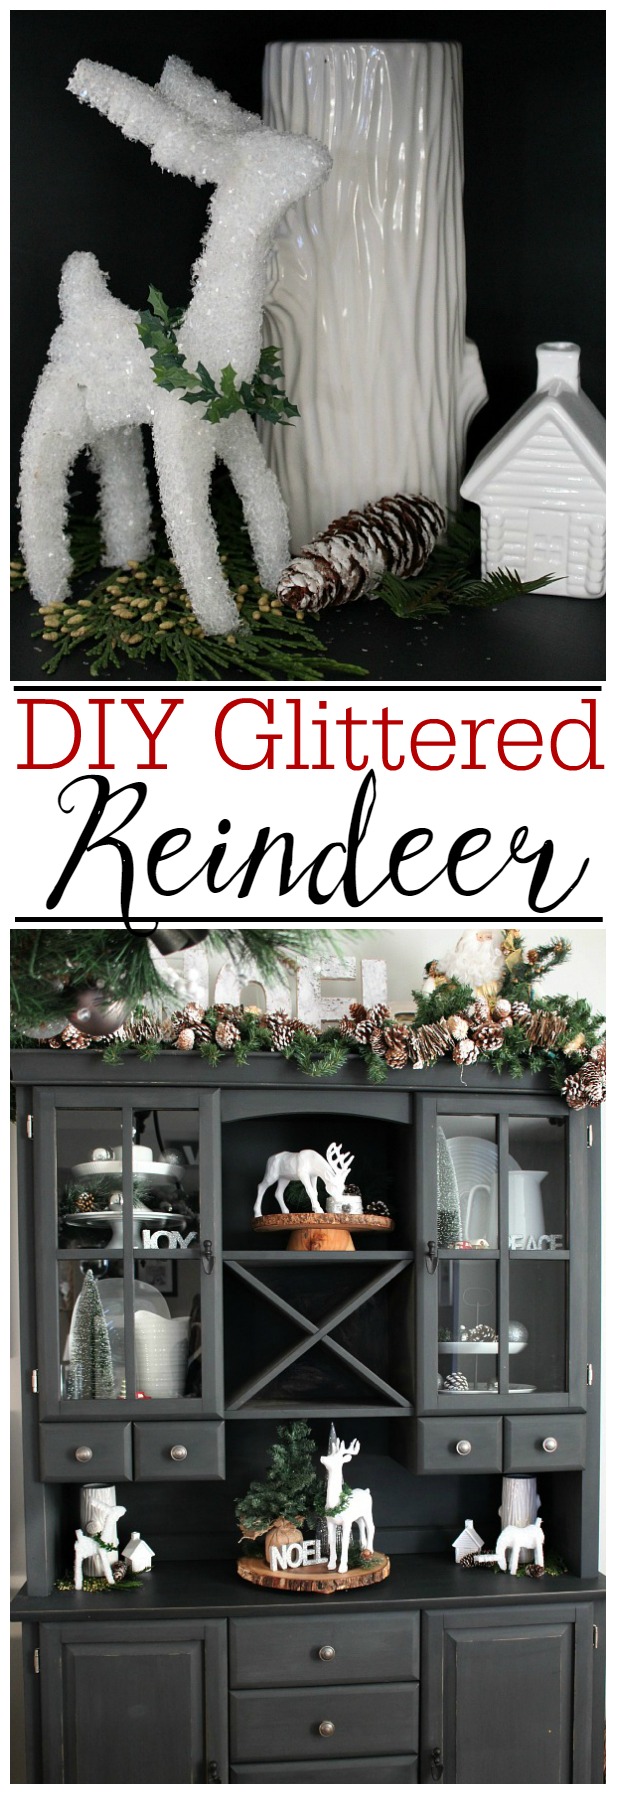 Make your own glittered reindeer from foam! Love these!